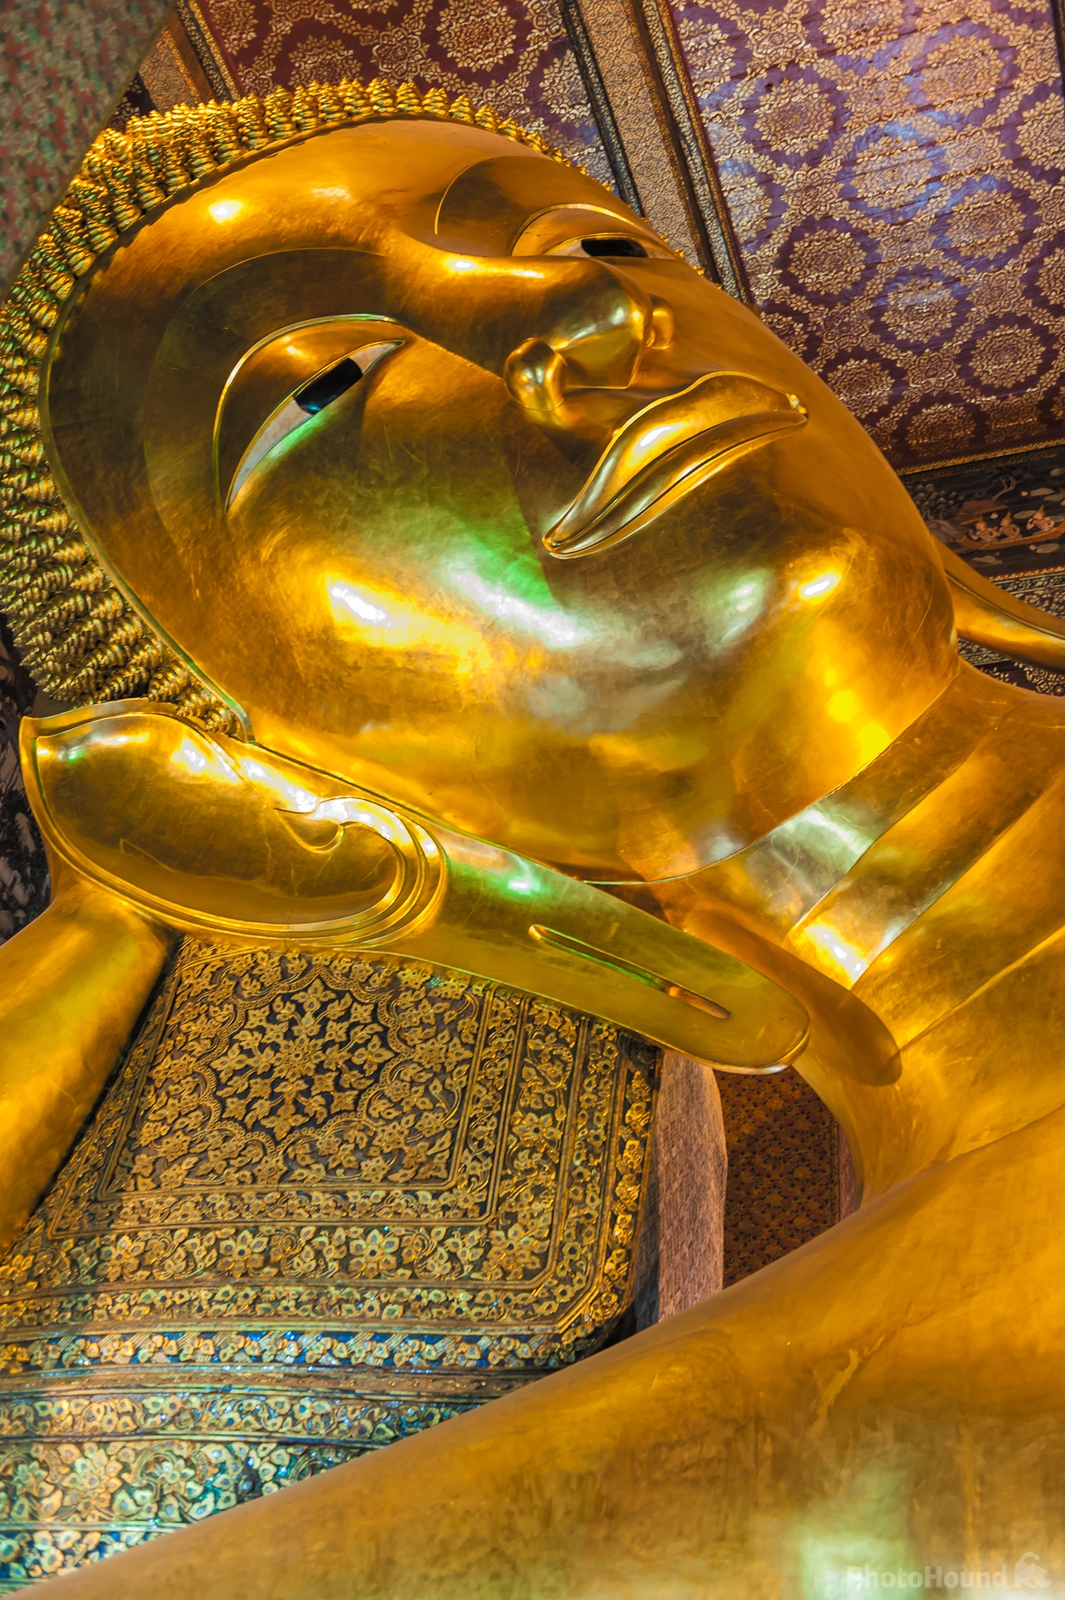 Image of Wat Pho by Sue Wolfe